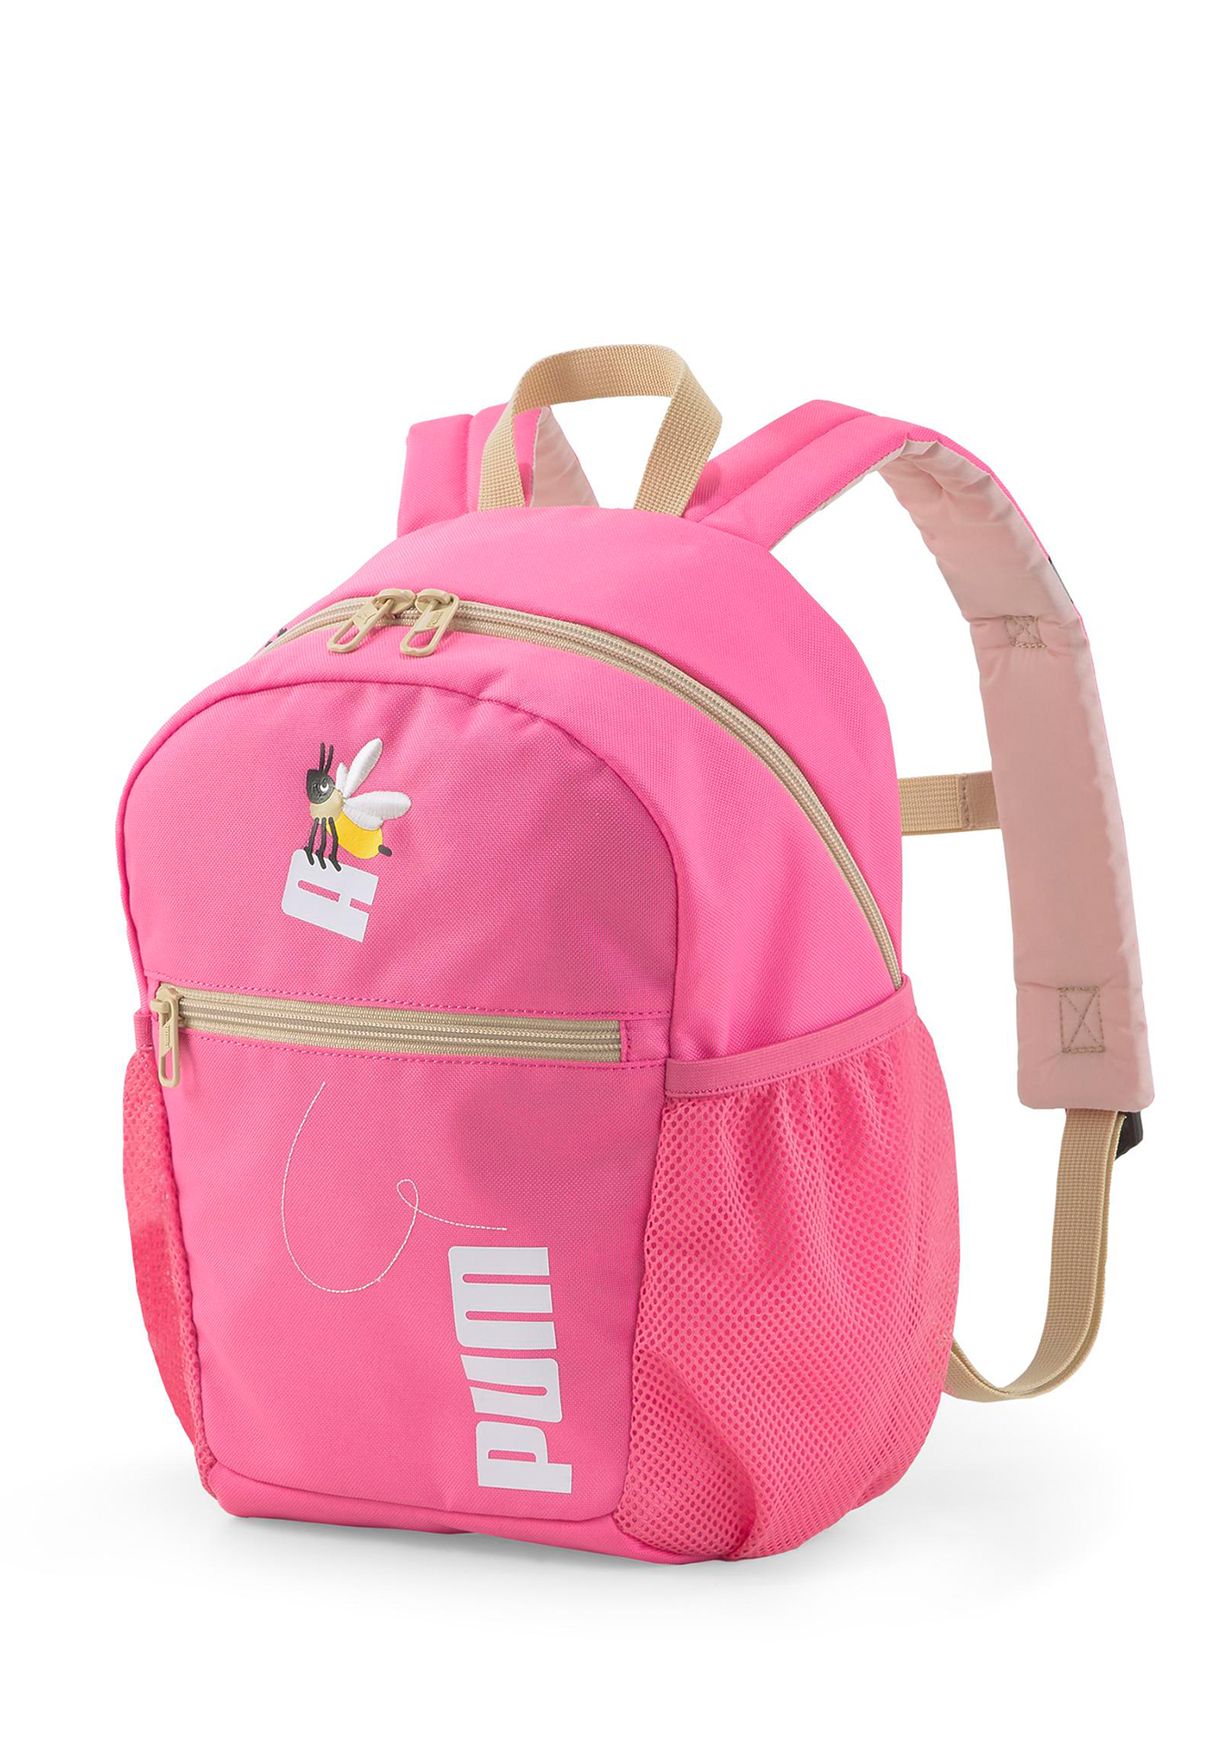 Kids Small World Backpack